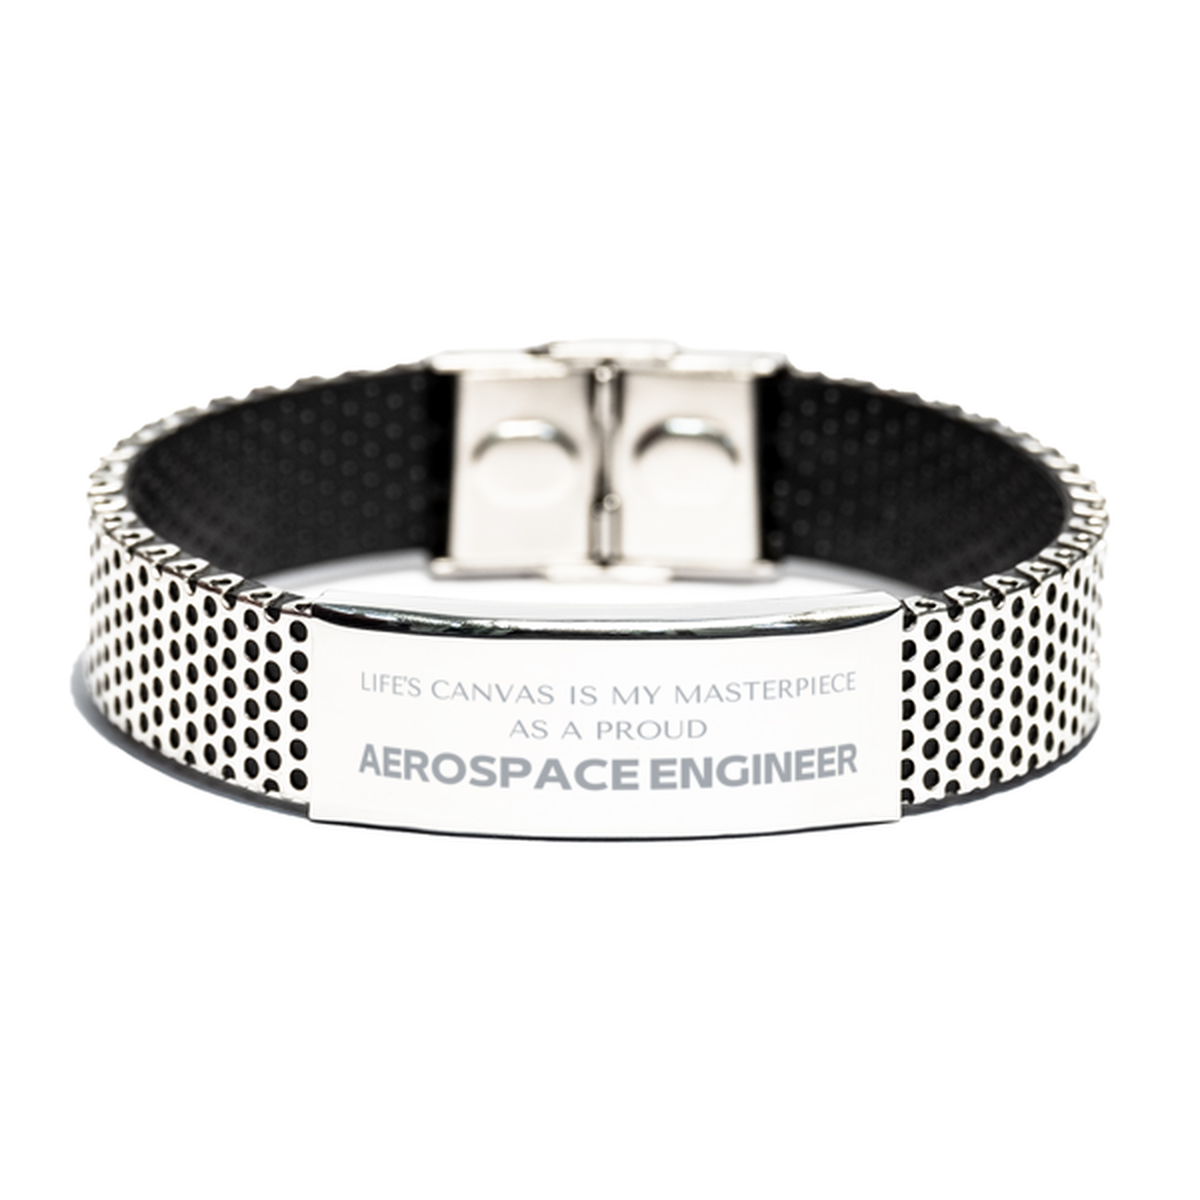 Proud Aerospace Engineer Gifts, Life's canvas is my masterpiece, Epic Birthday Christmas Unique Stainless Steel Bracelet For Aerospace Engineer, Coworkers, Men, Women, Friends